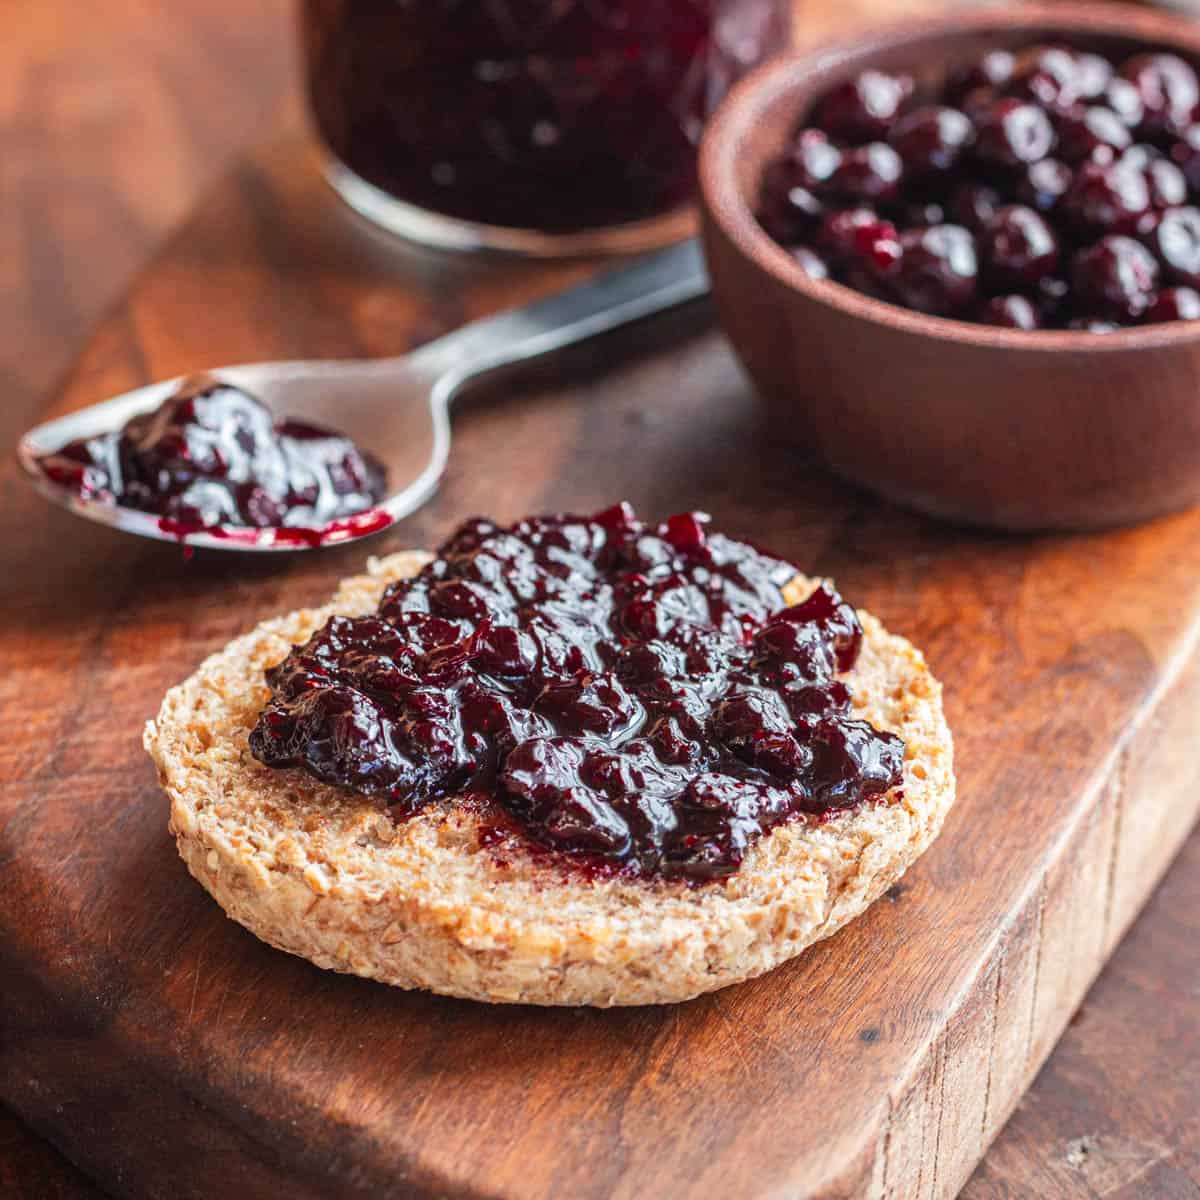 A buttered English muffin spread with freshly cooked black currant preserves on a board next to a jar of currant jam and a bowl of fresh black currants. 